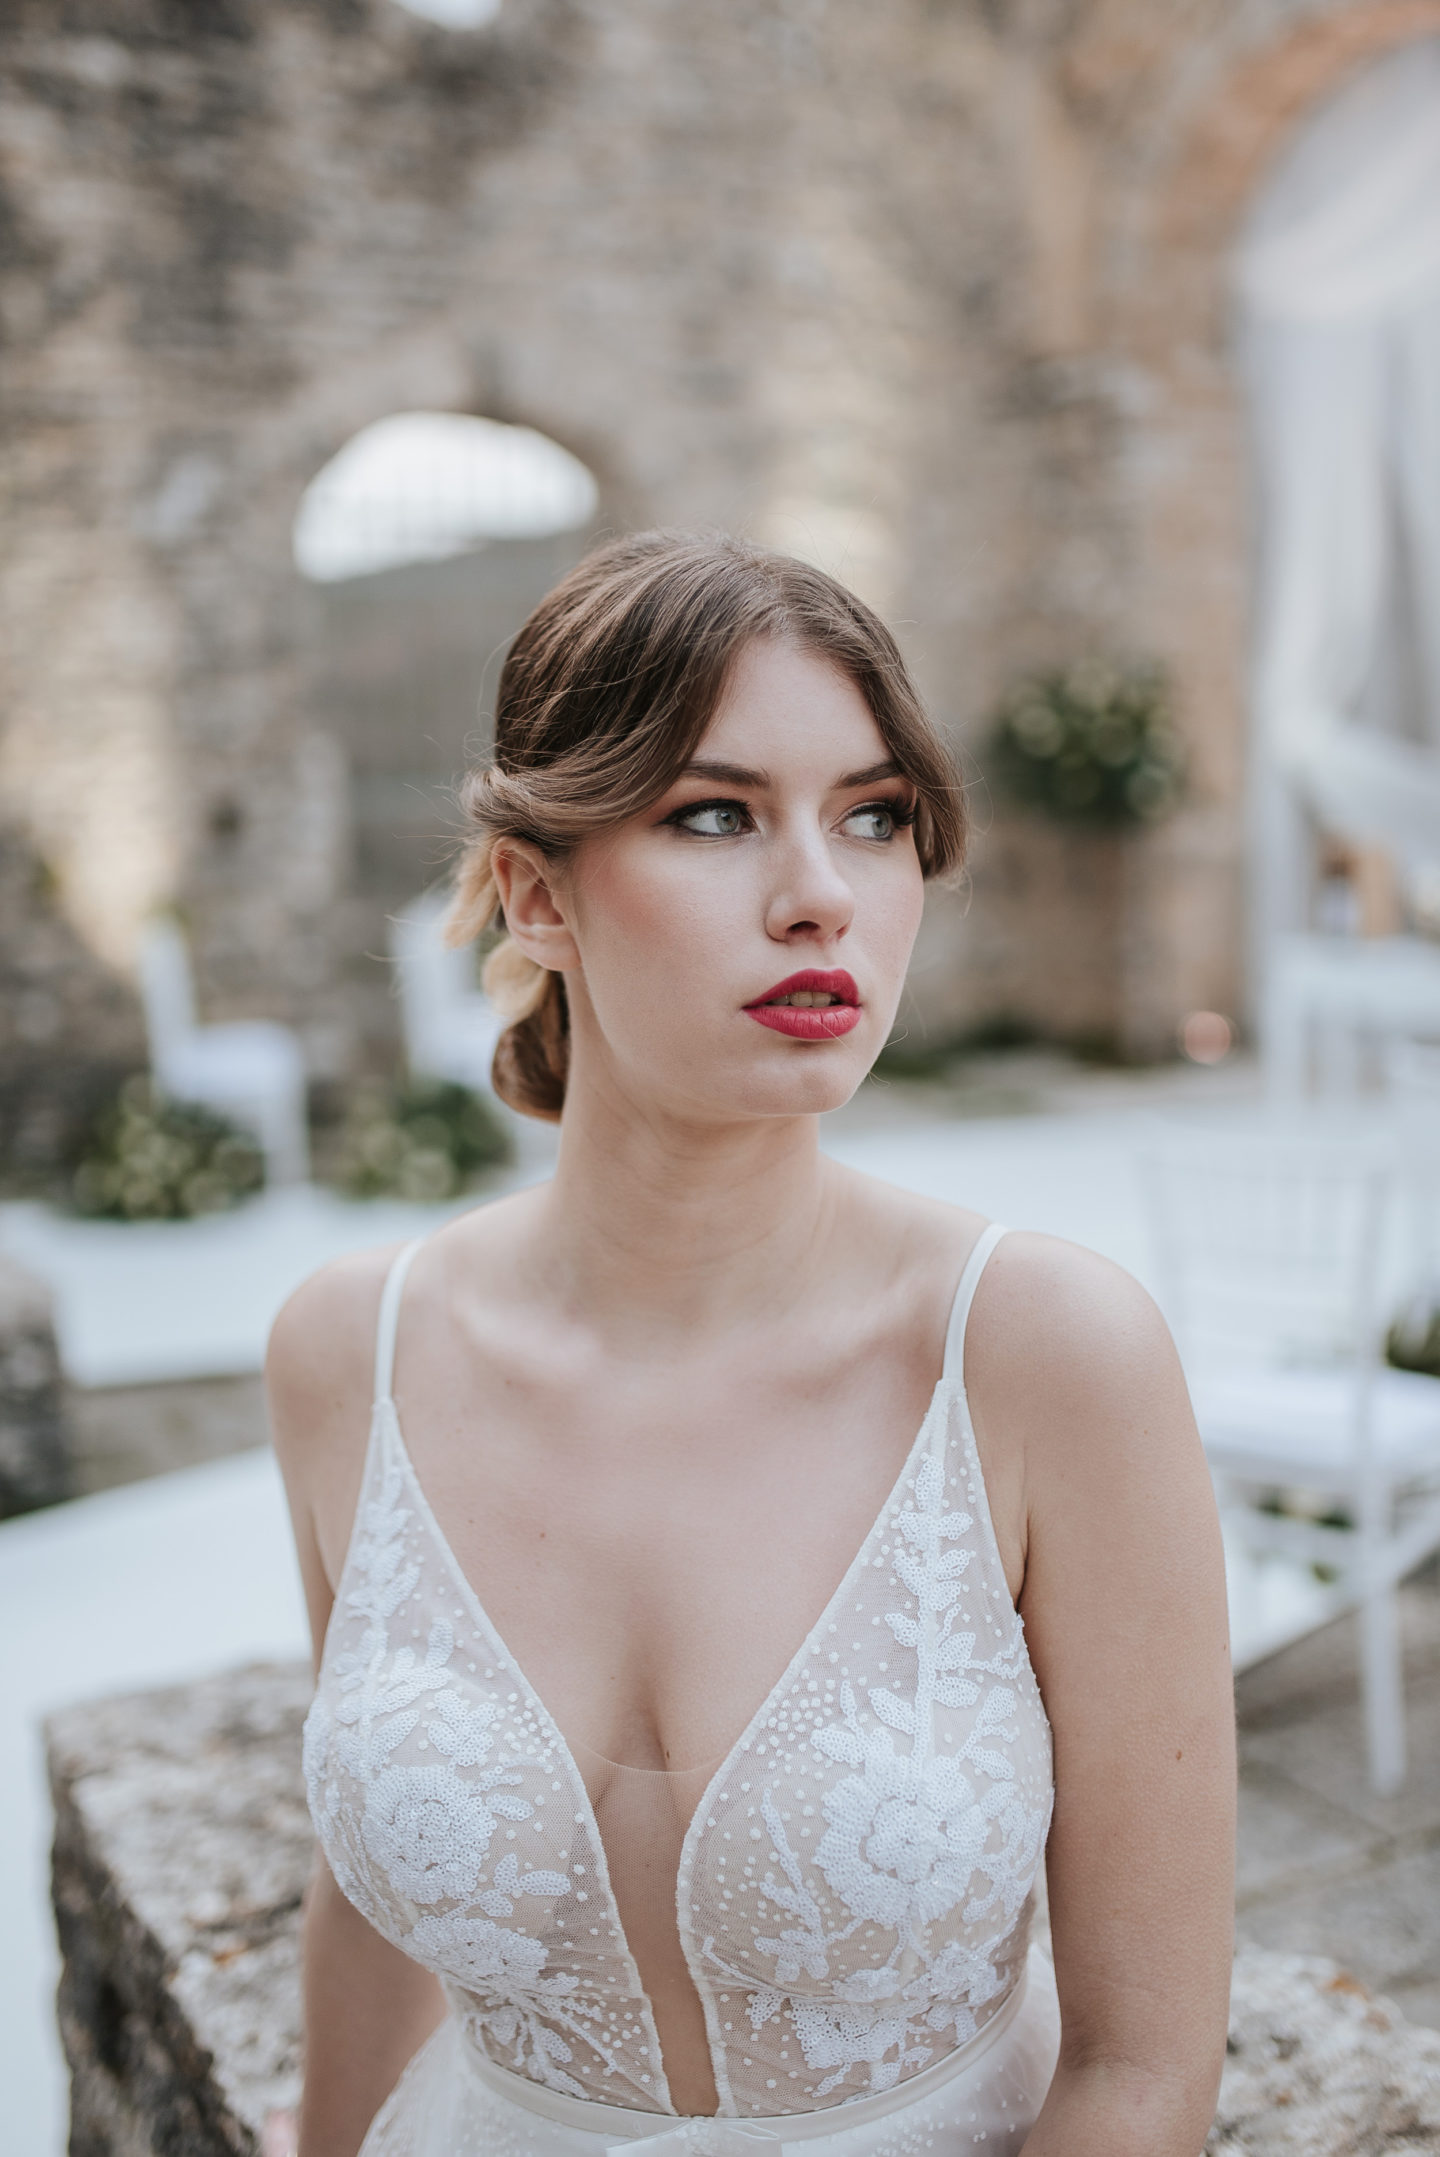 Botanical Castle Wedding with Contemporary Vibes at Dvigrad Ruins, Croatia